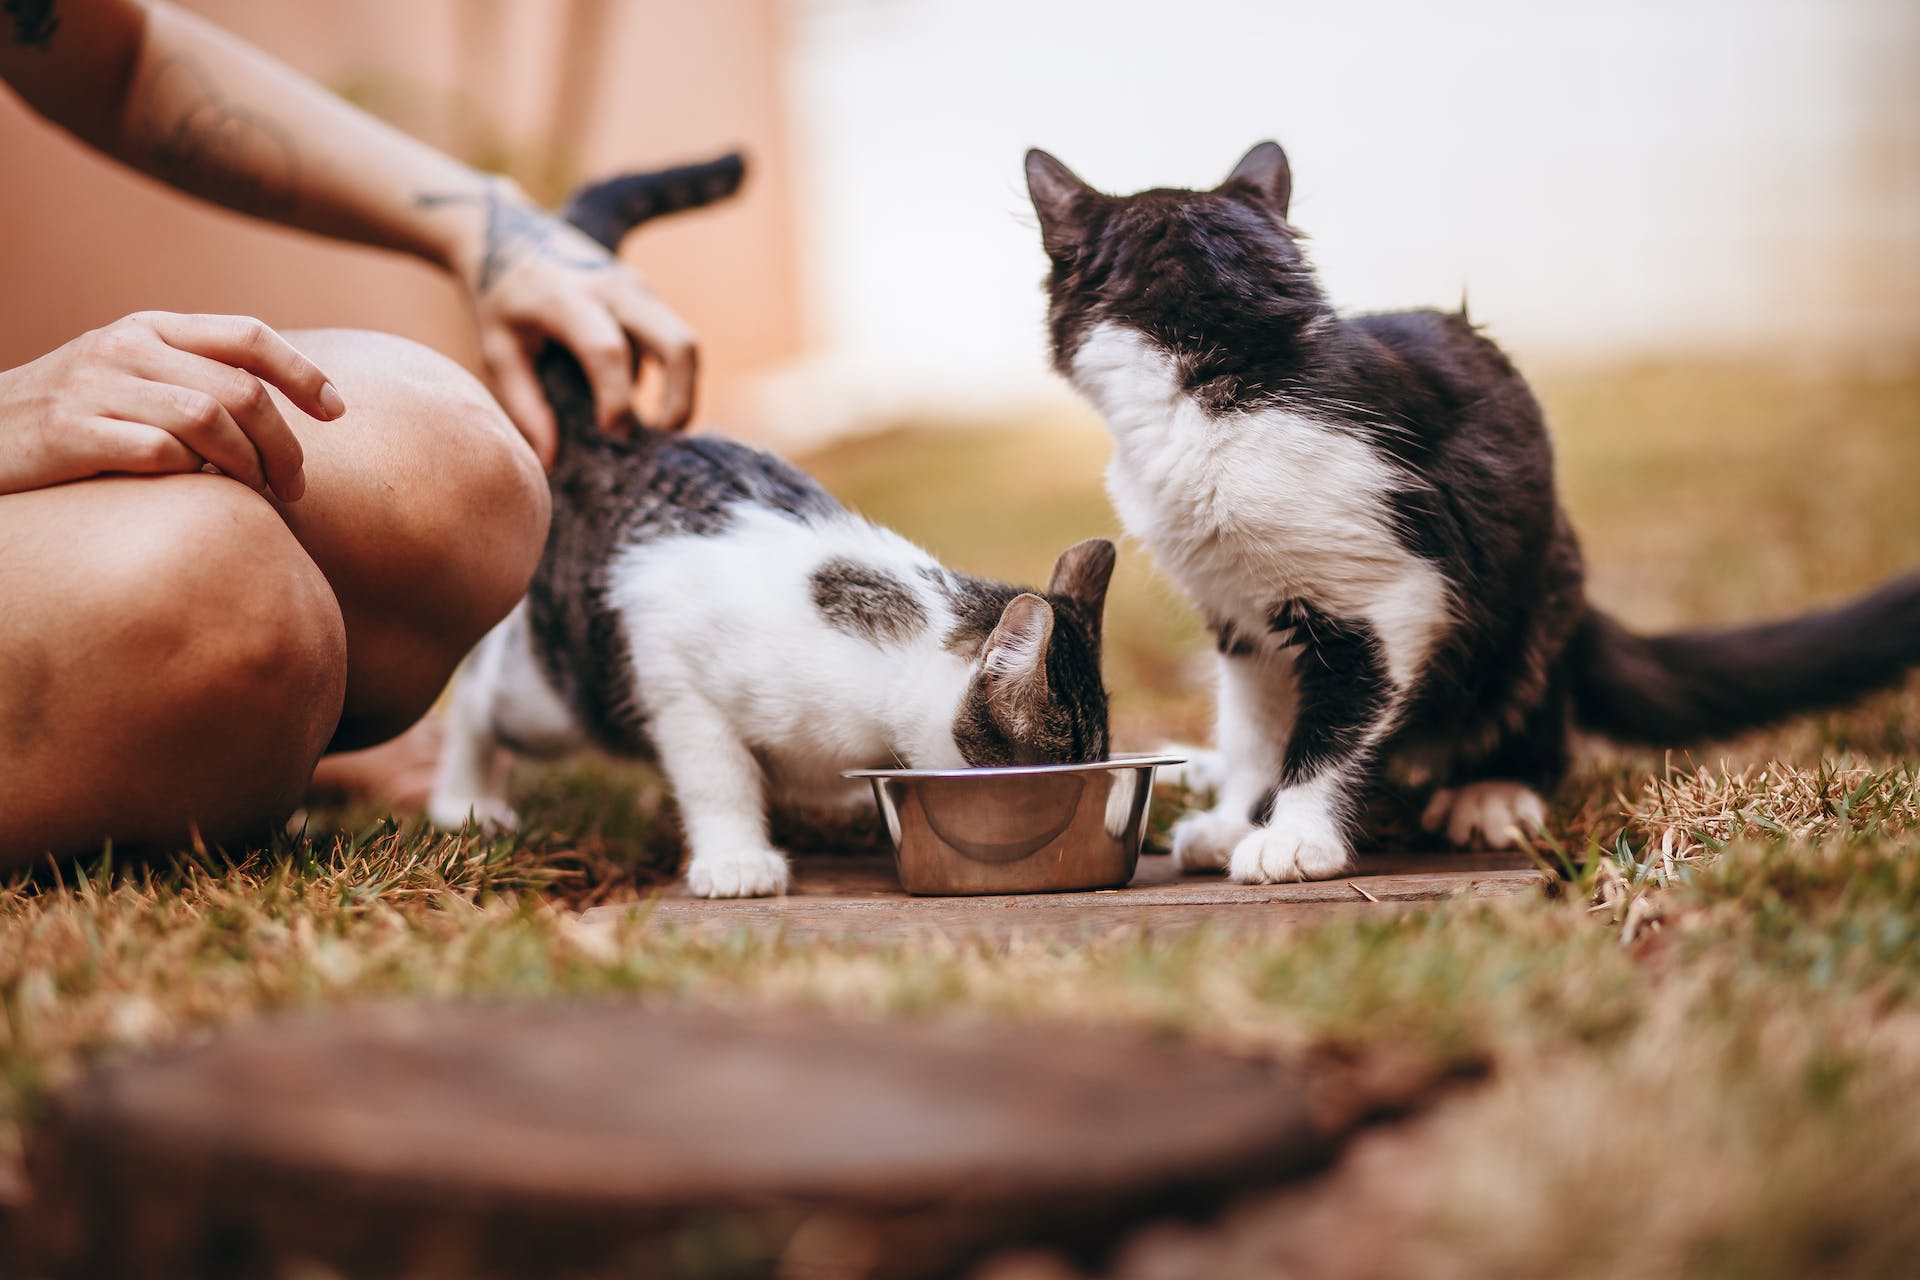 A pair of kittens eating from a bowl